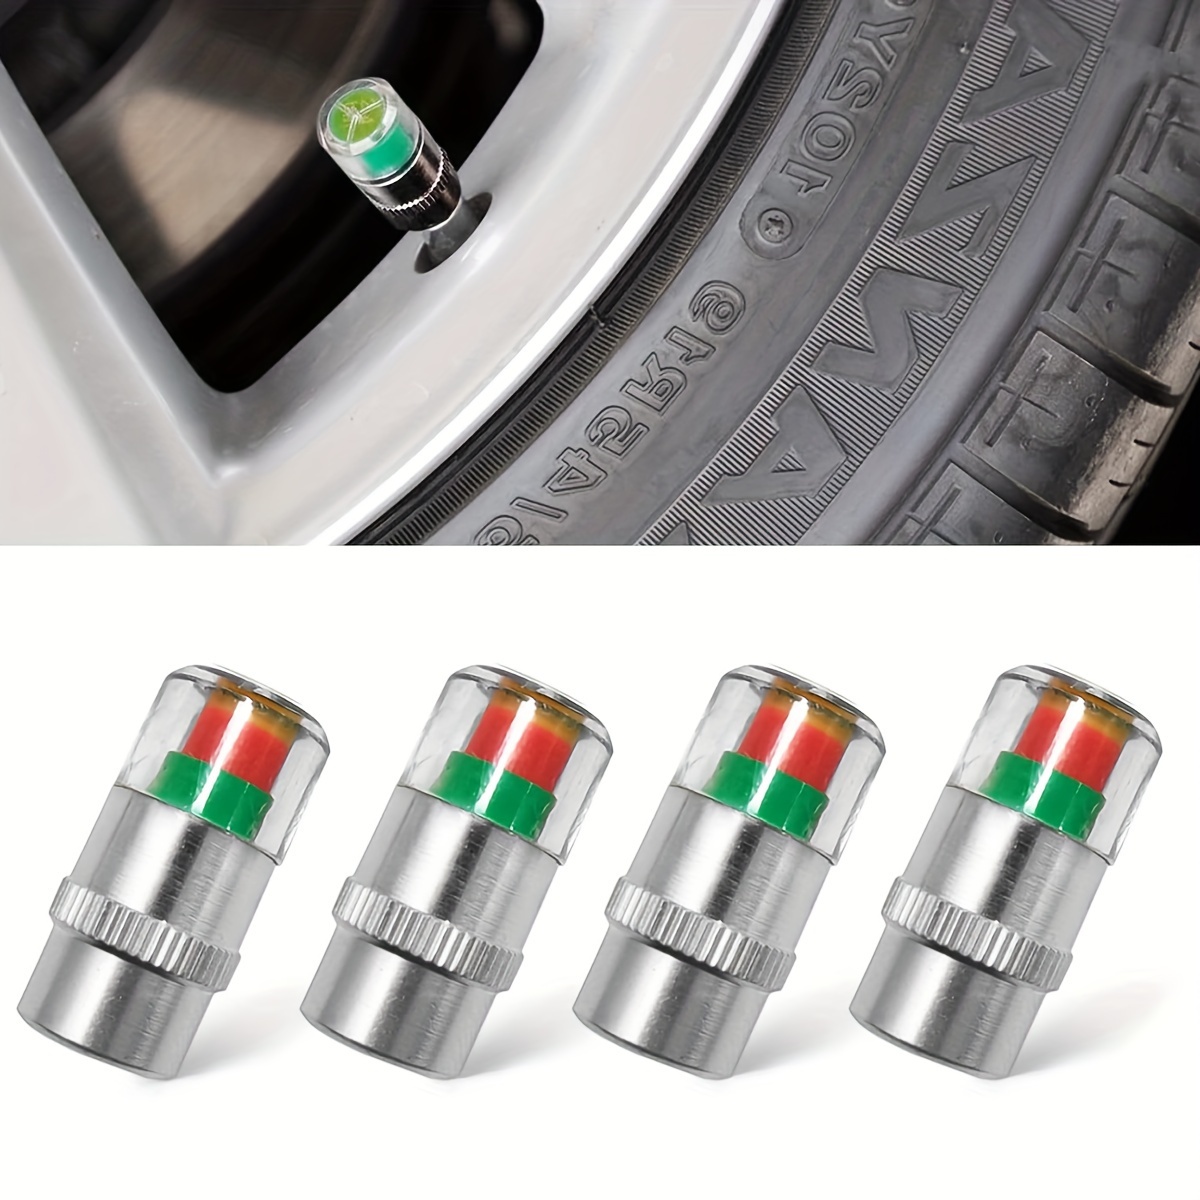 2.4 Bar Car Tyre Pressure Alert Monitor With Auto Tire Valve Stem Caps  Launch Tpms Tool For Visible Car Accessories From Blake Online, $2.06